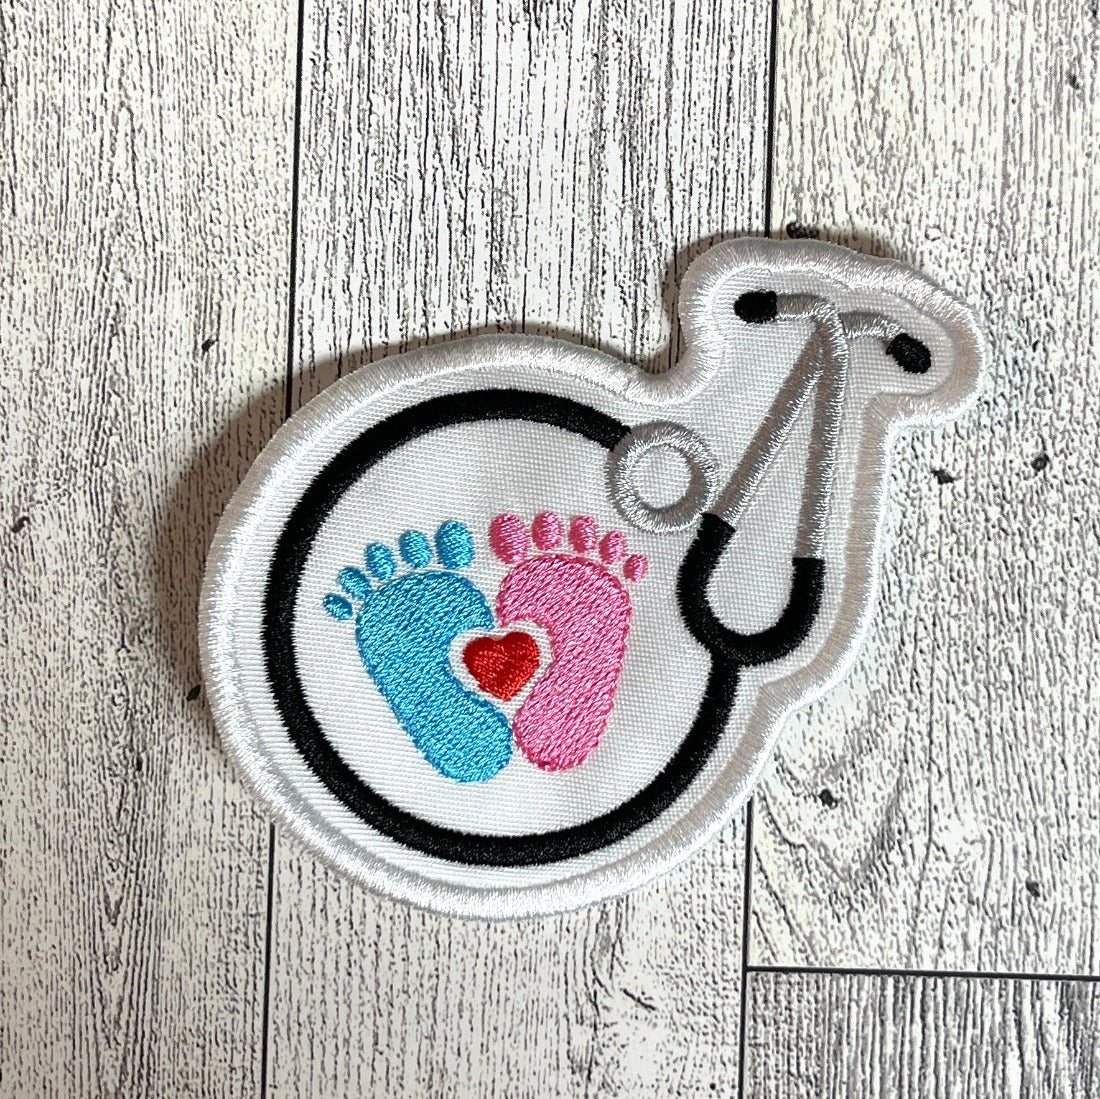 Labor & Delivery Nurse Embroidered Patch